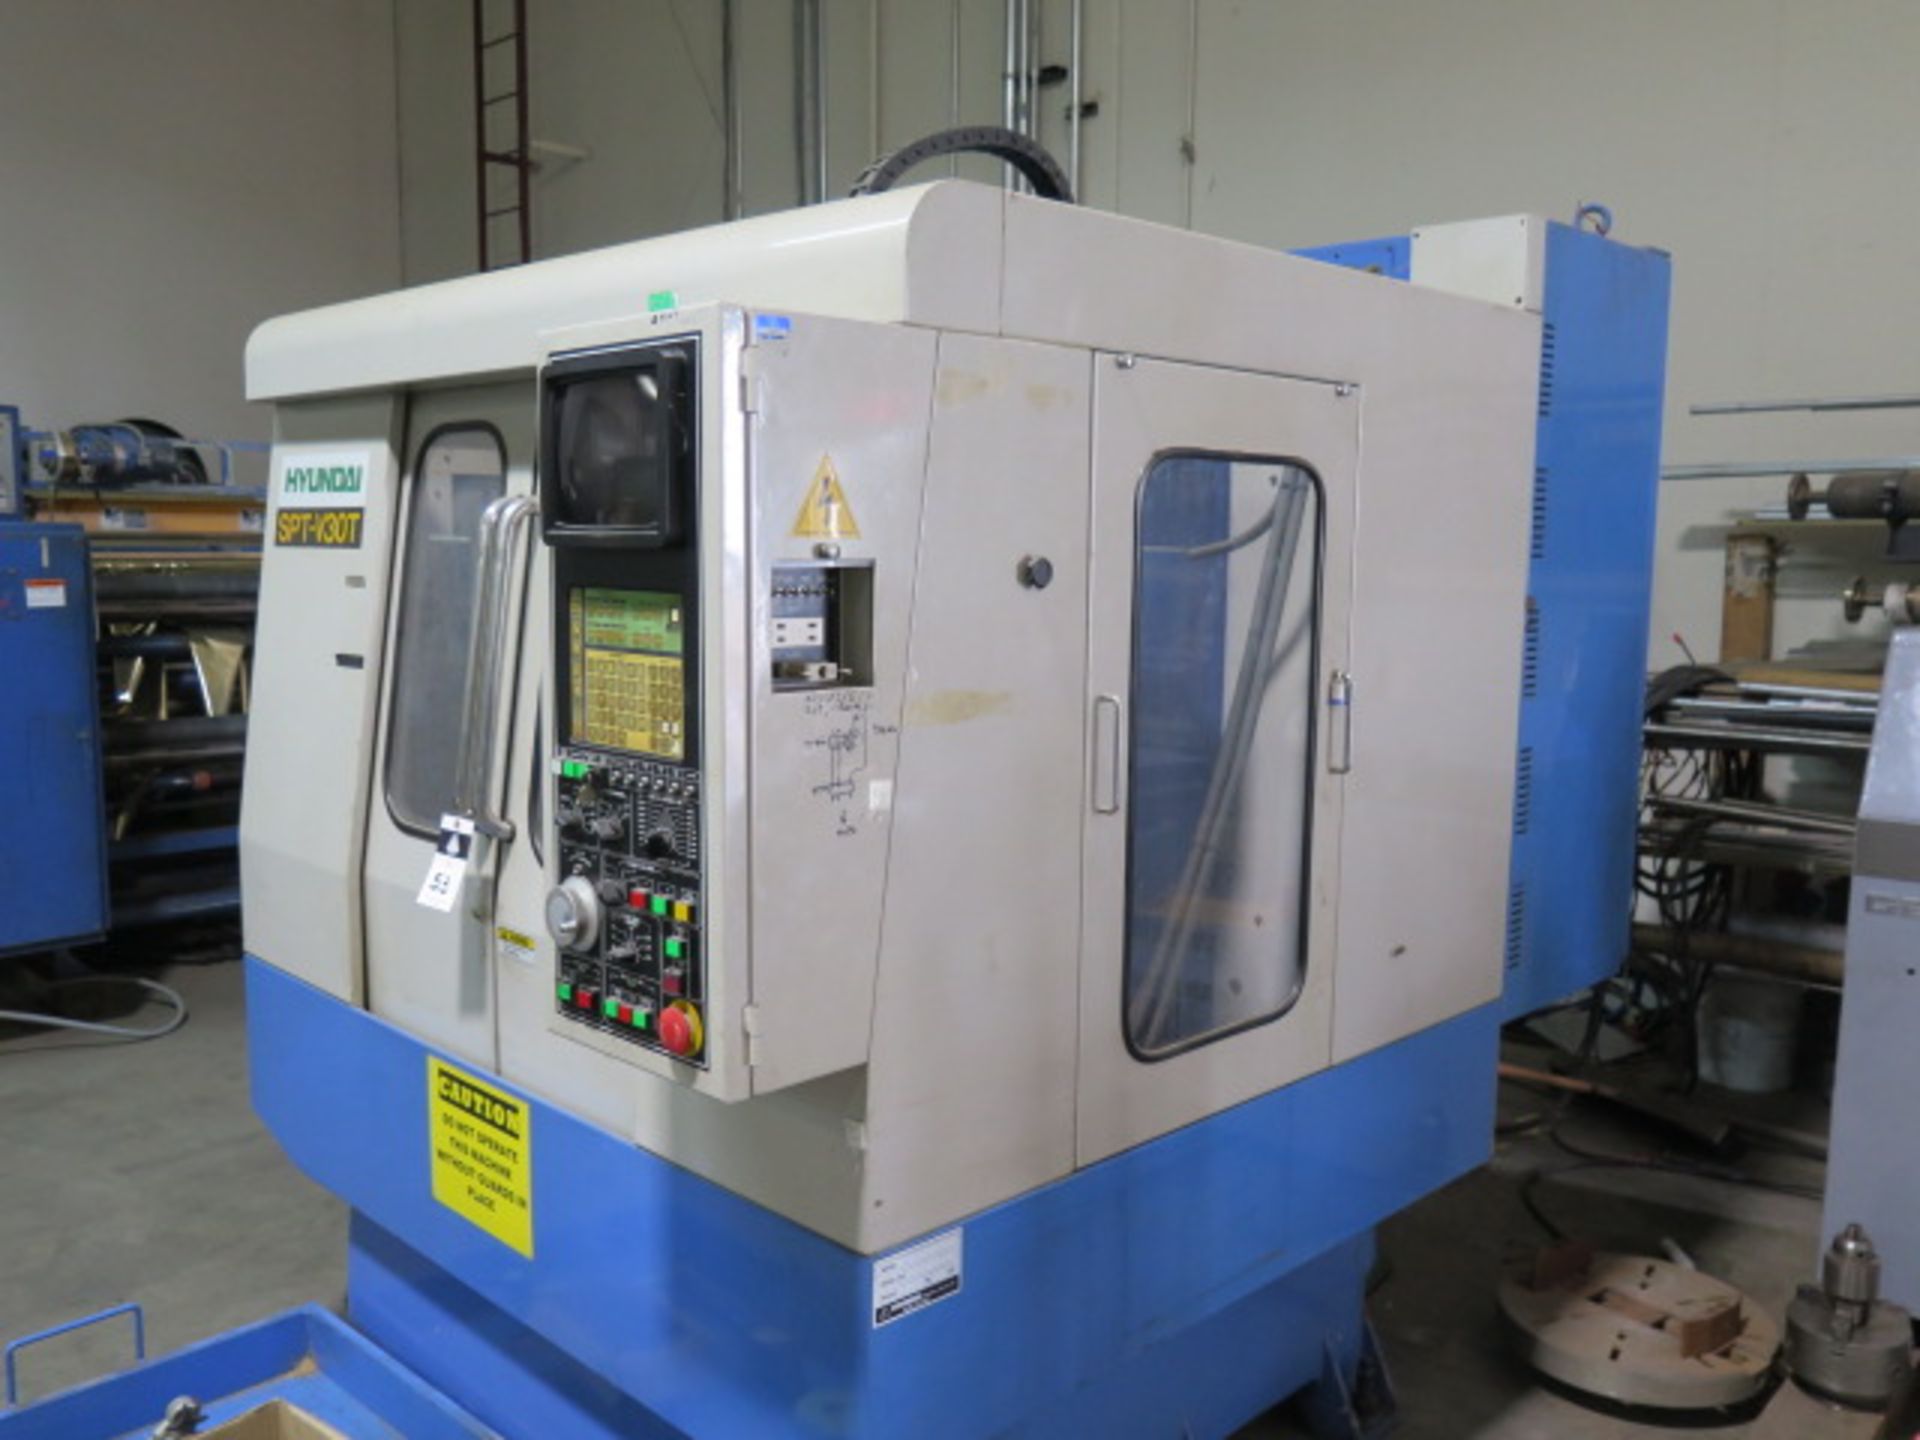 Hyundai SPT-V30T CNC Drilling and Tapping Center s/n 70D7029 w/ Yasnac MX3 SOLD AS IS - Image 2 of 16